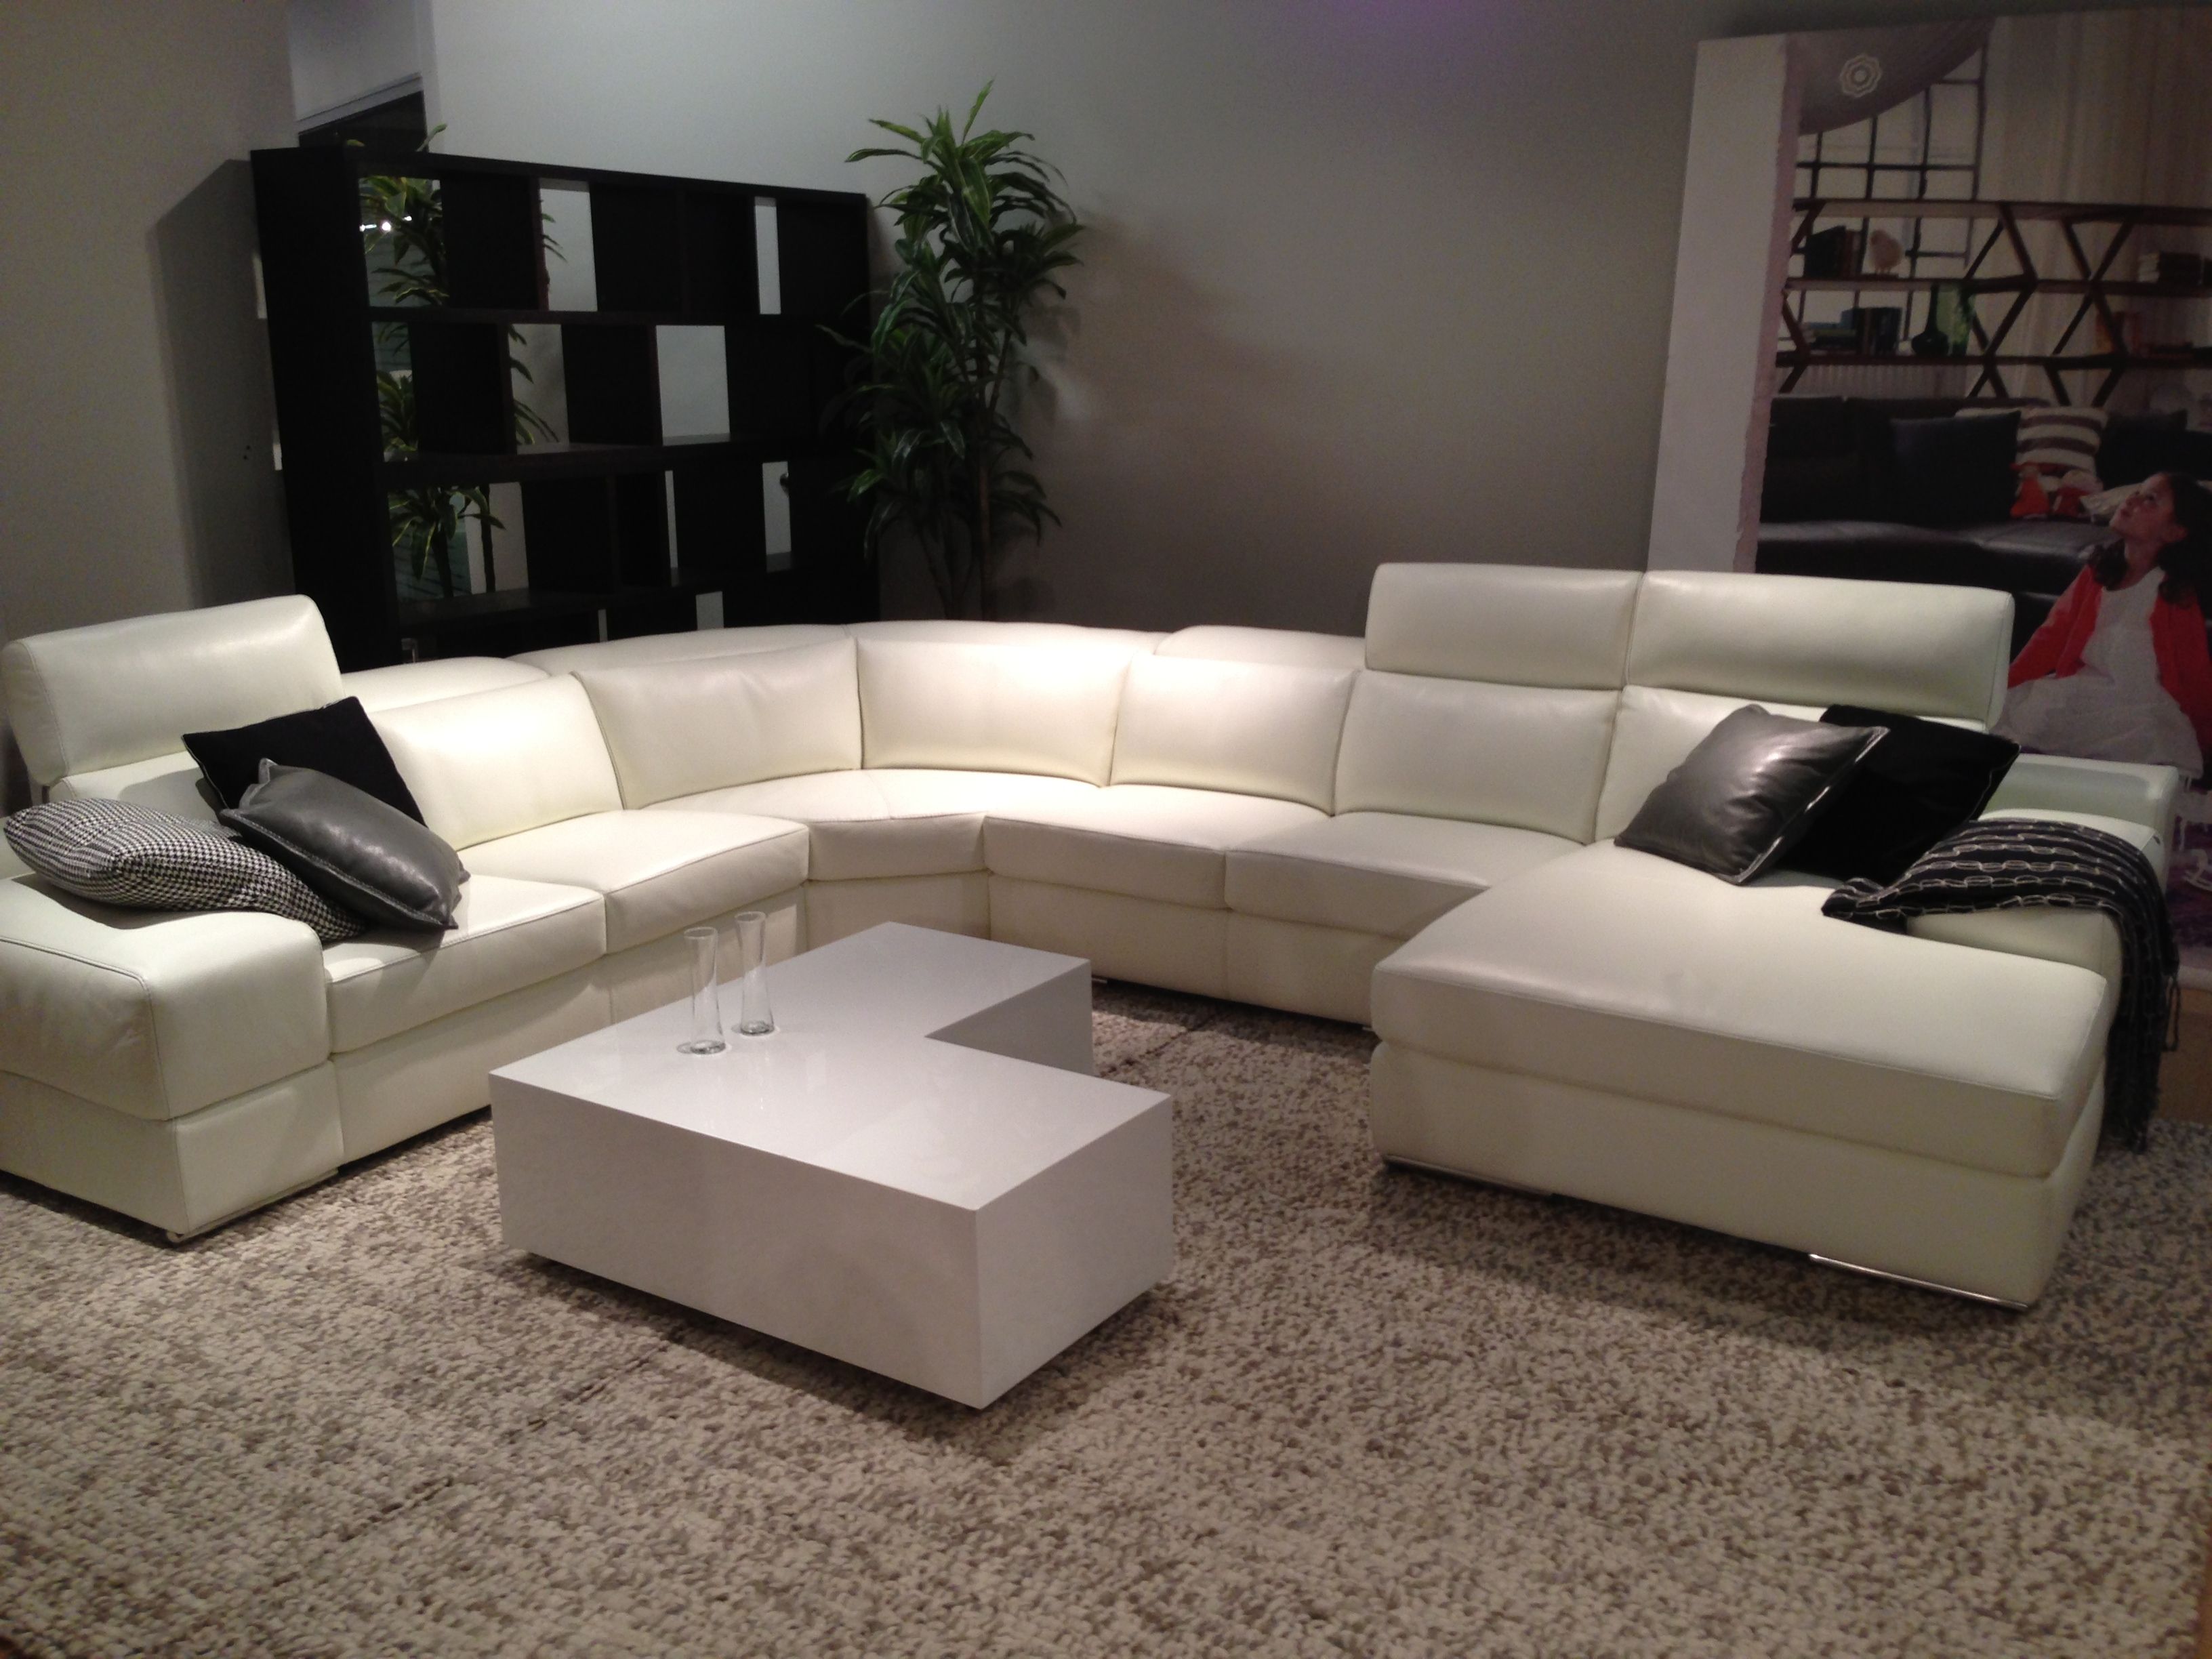 Modern White Leather Sectional Htl Portland Oregon 1,632×1,224 With Portland Or Sectional Sofas (View 7 of 10)